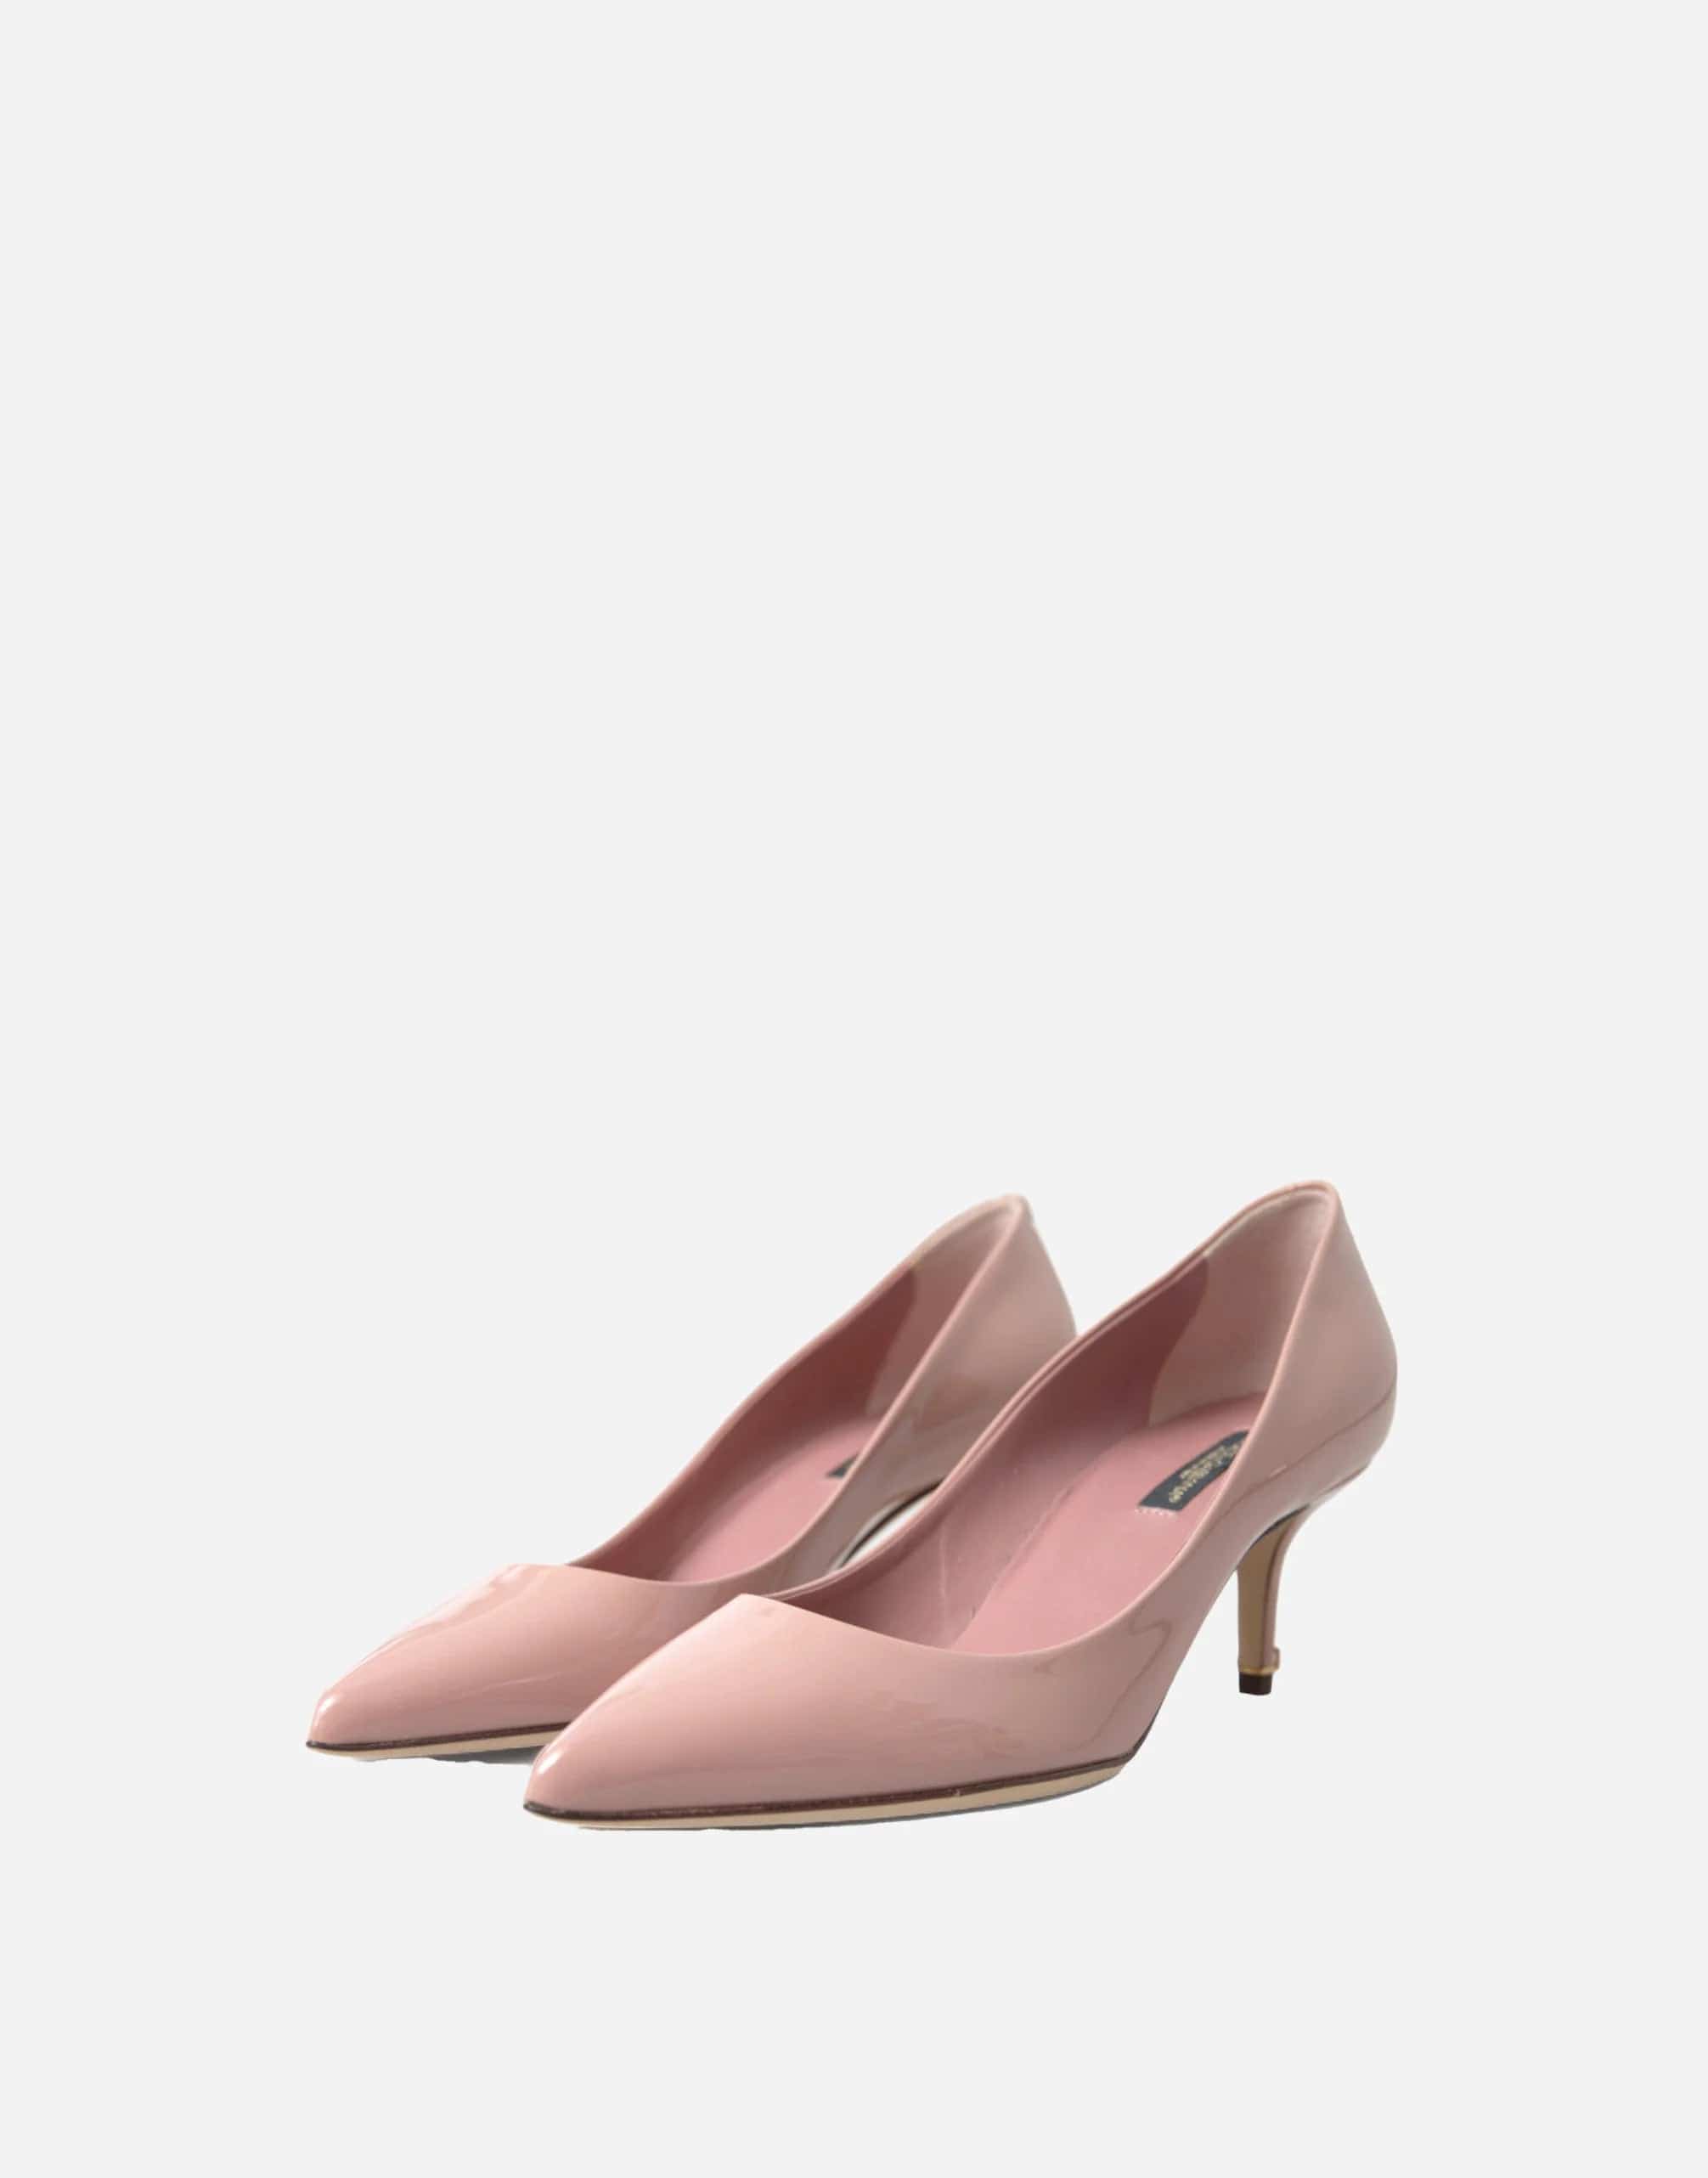 Low Pumps With Patent Leather